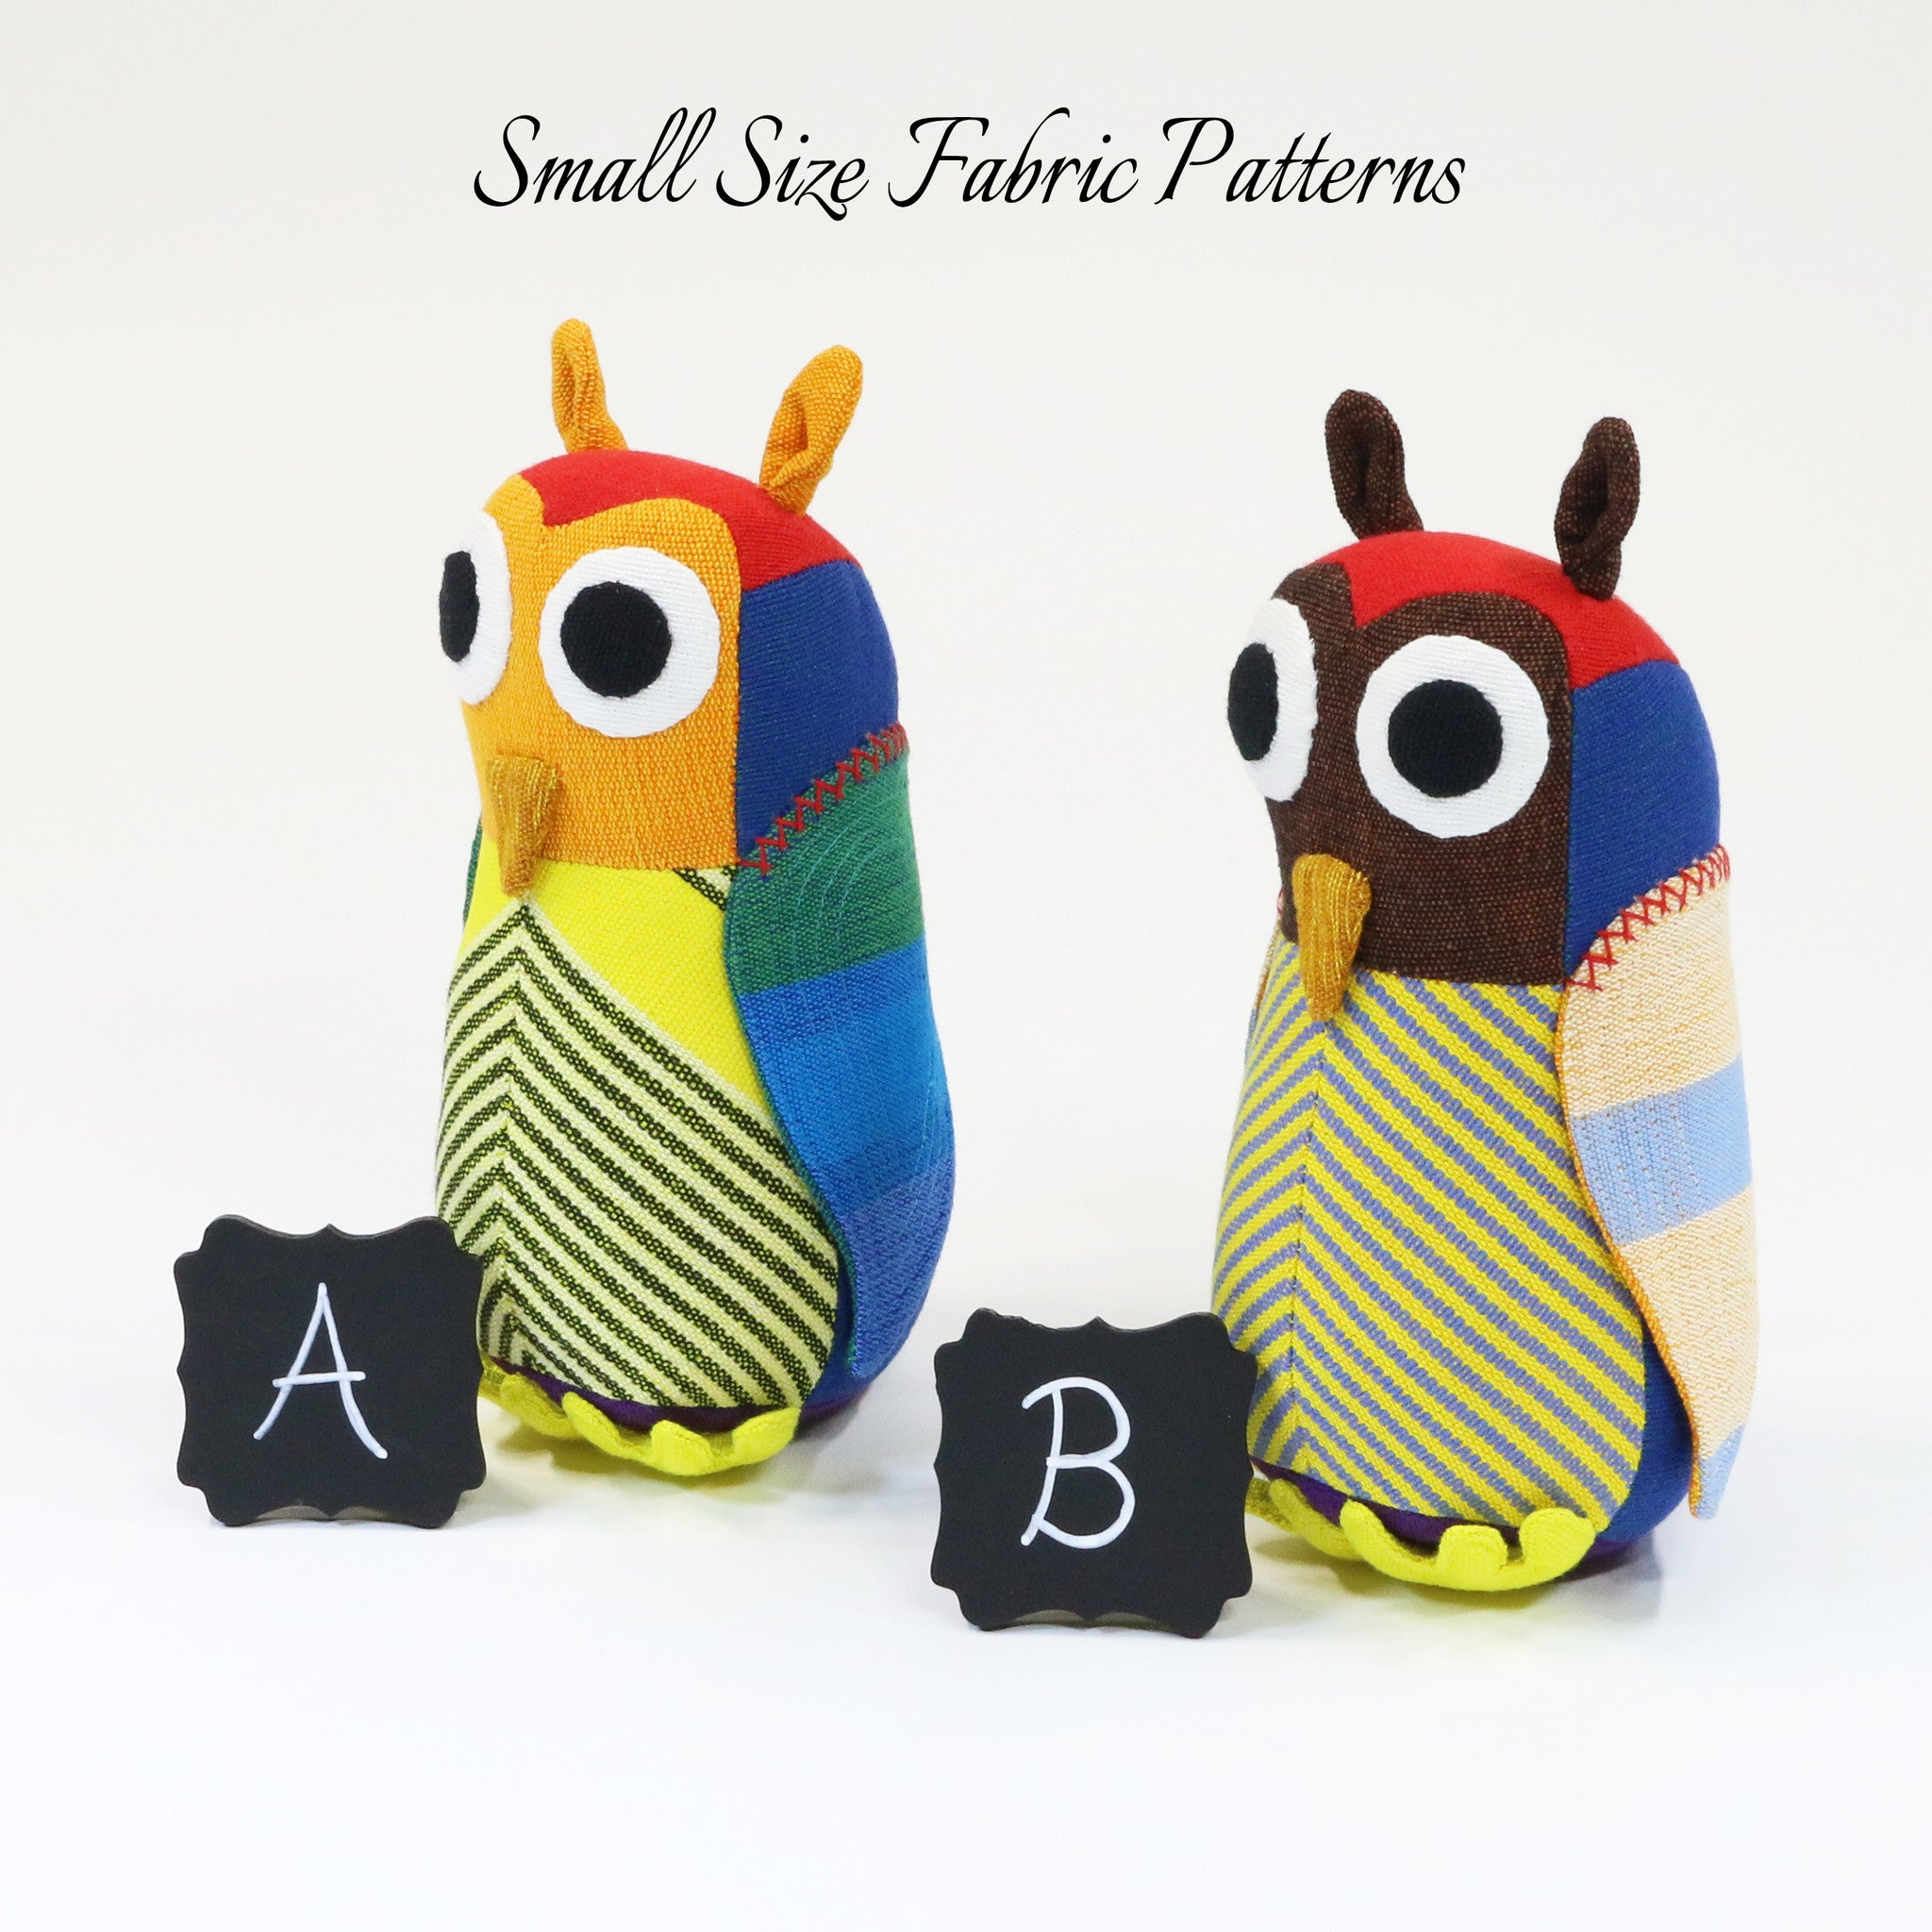 Howie, the Owl – all small size fabric patterns shown